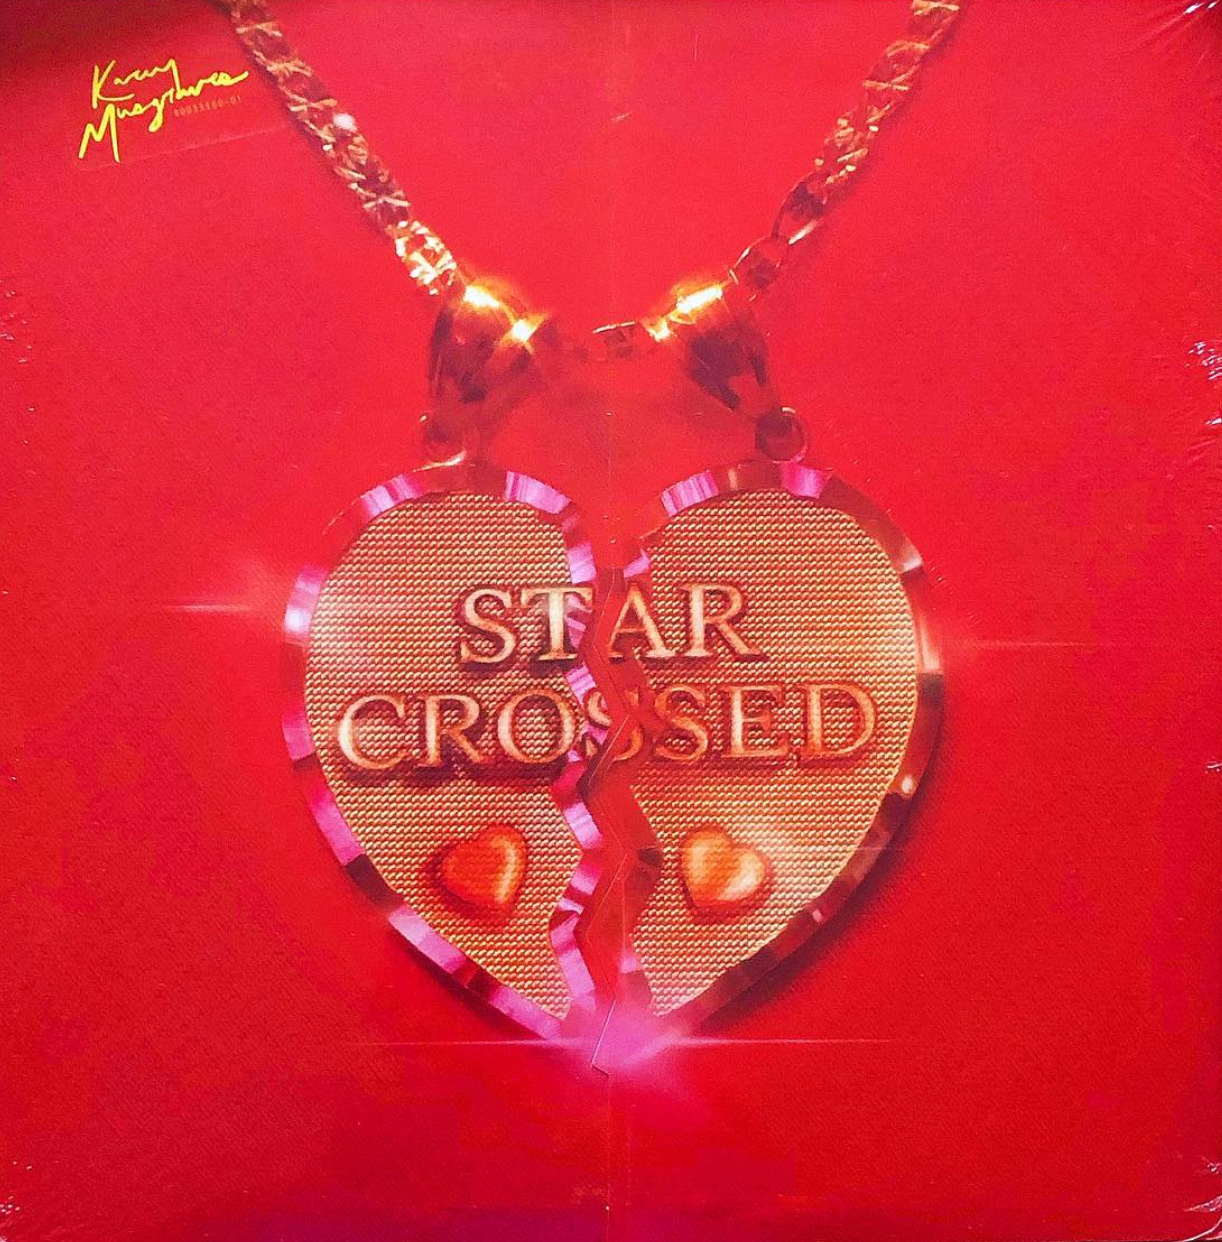 Star Crossed (Limited Edition Indie Exclusive Clear Vinyl)